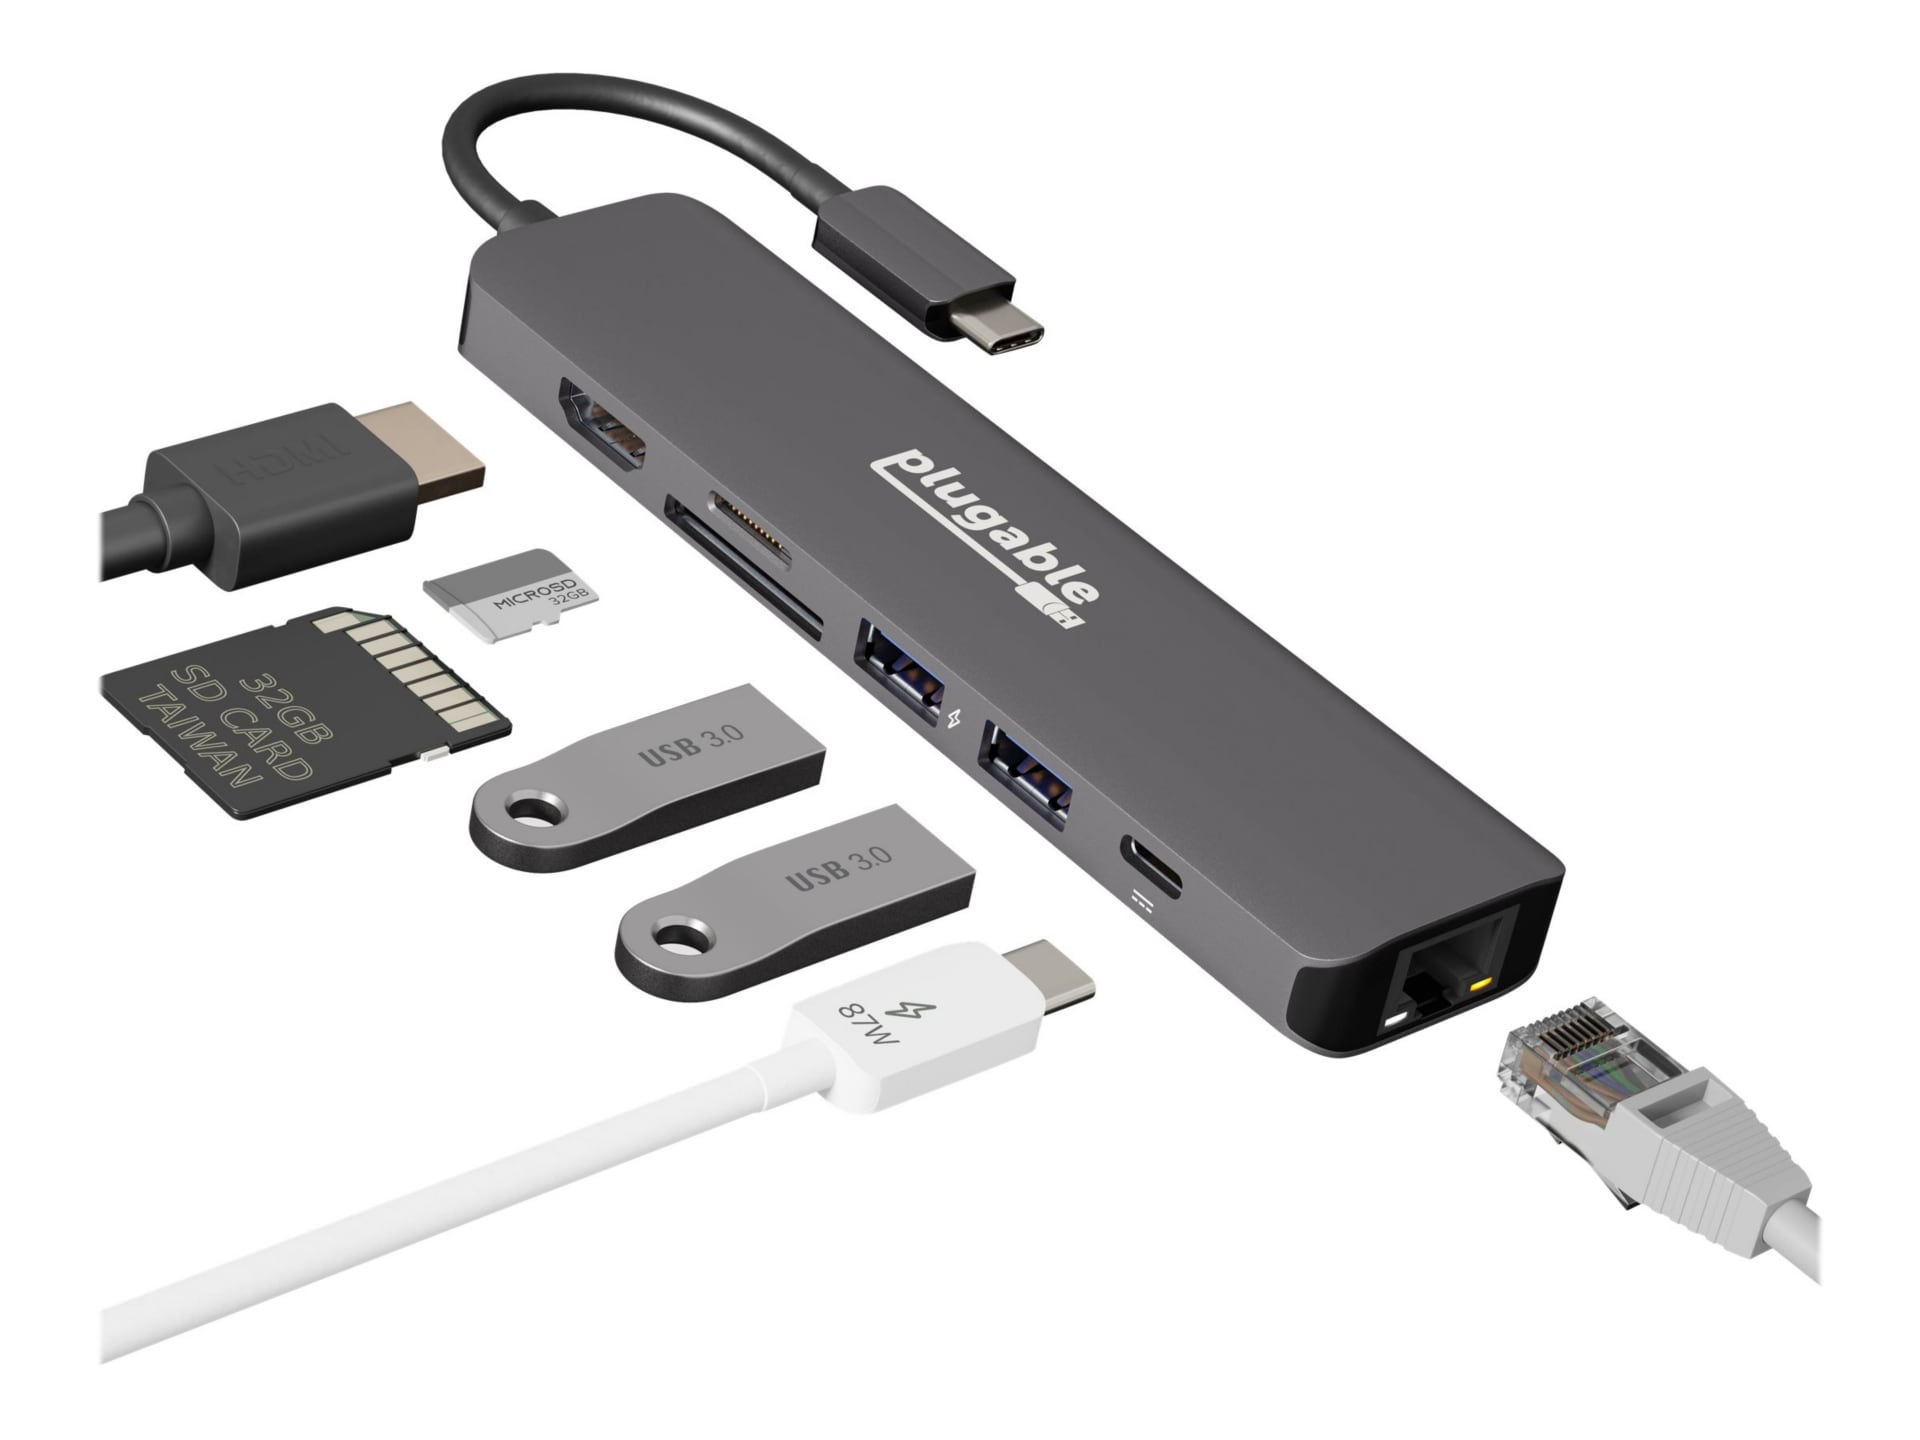 Plugable Plugable 7-in-1 USB C Hub Adapter with Ethernet - USBC-7IN1E - Docking Stations & Port Replicators - CDW.com